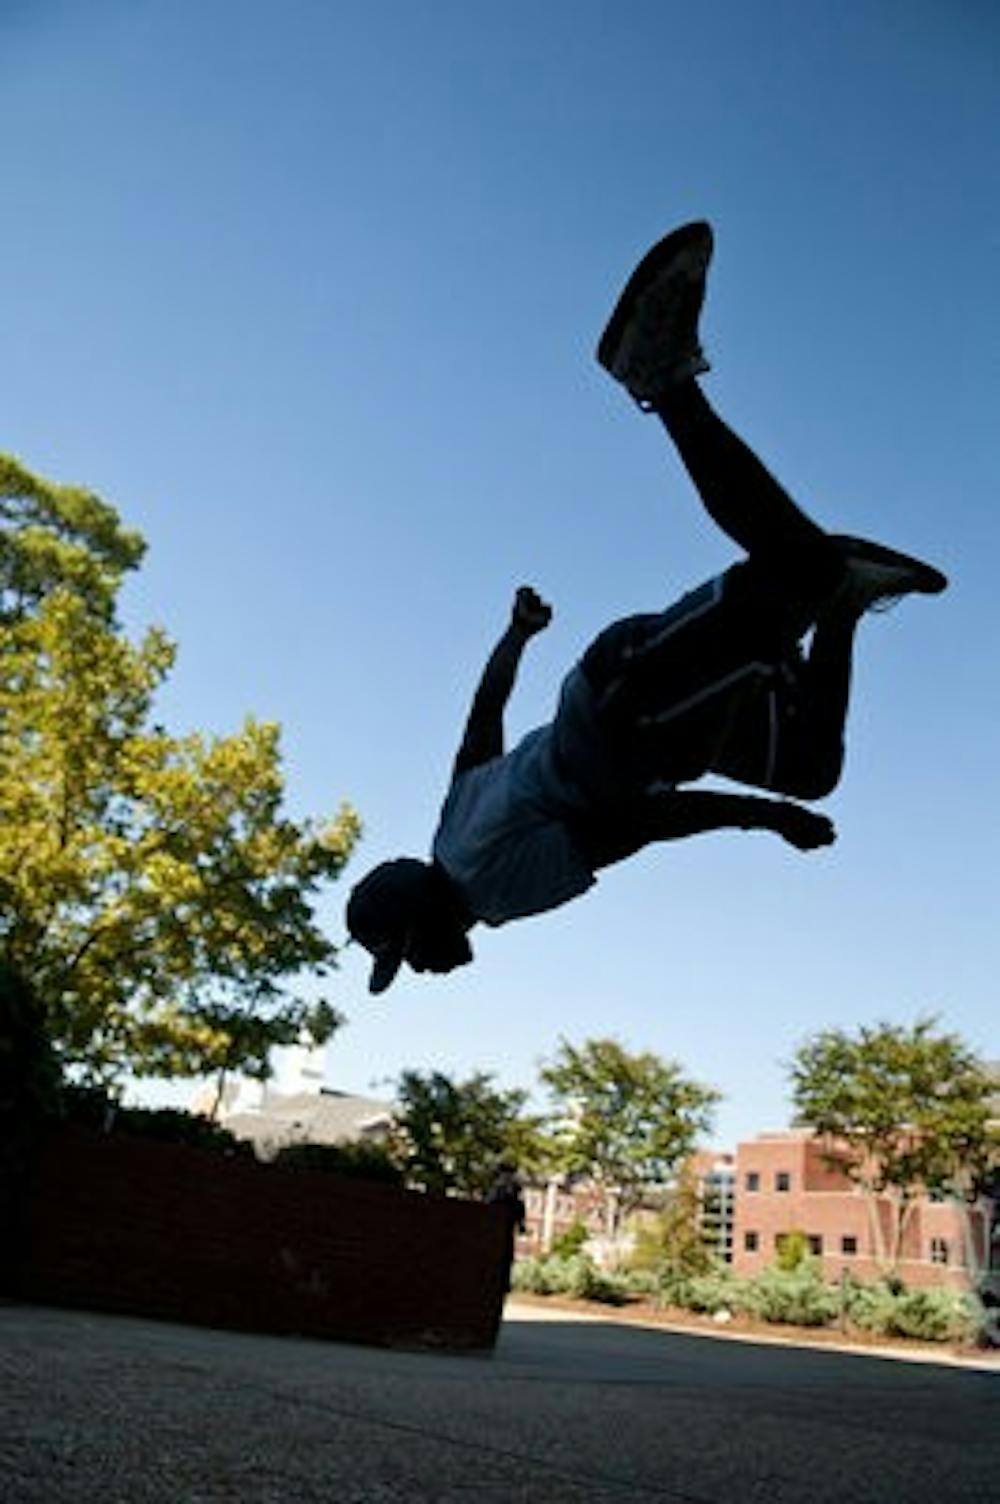 Ryan Doyle performs his gravity-defying parkour stunts on Auburn's campus Friday. (CONTRIBUTED)